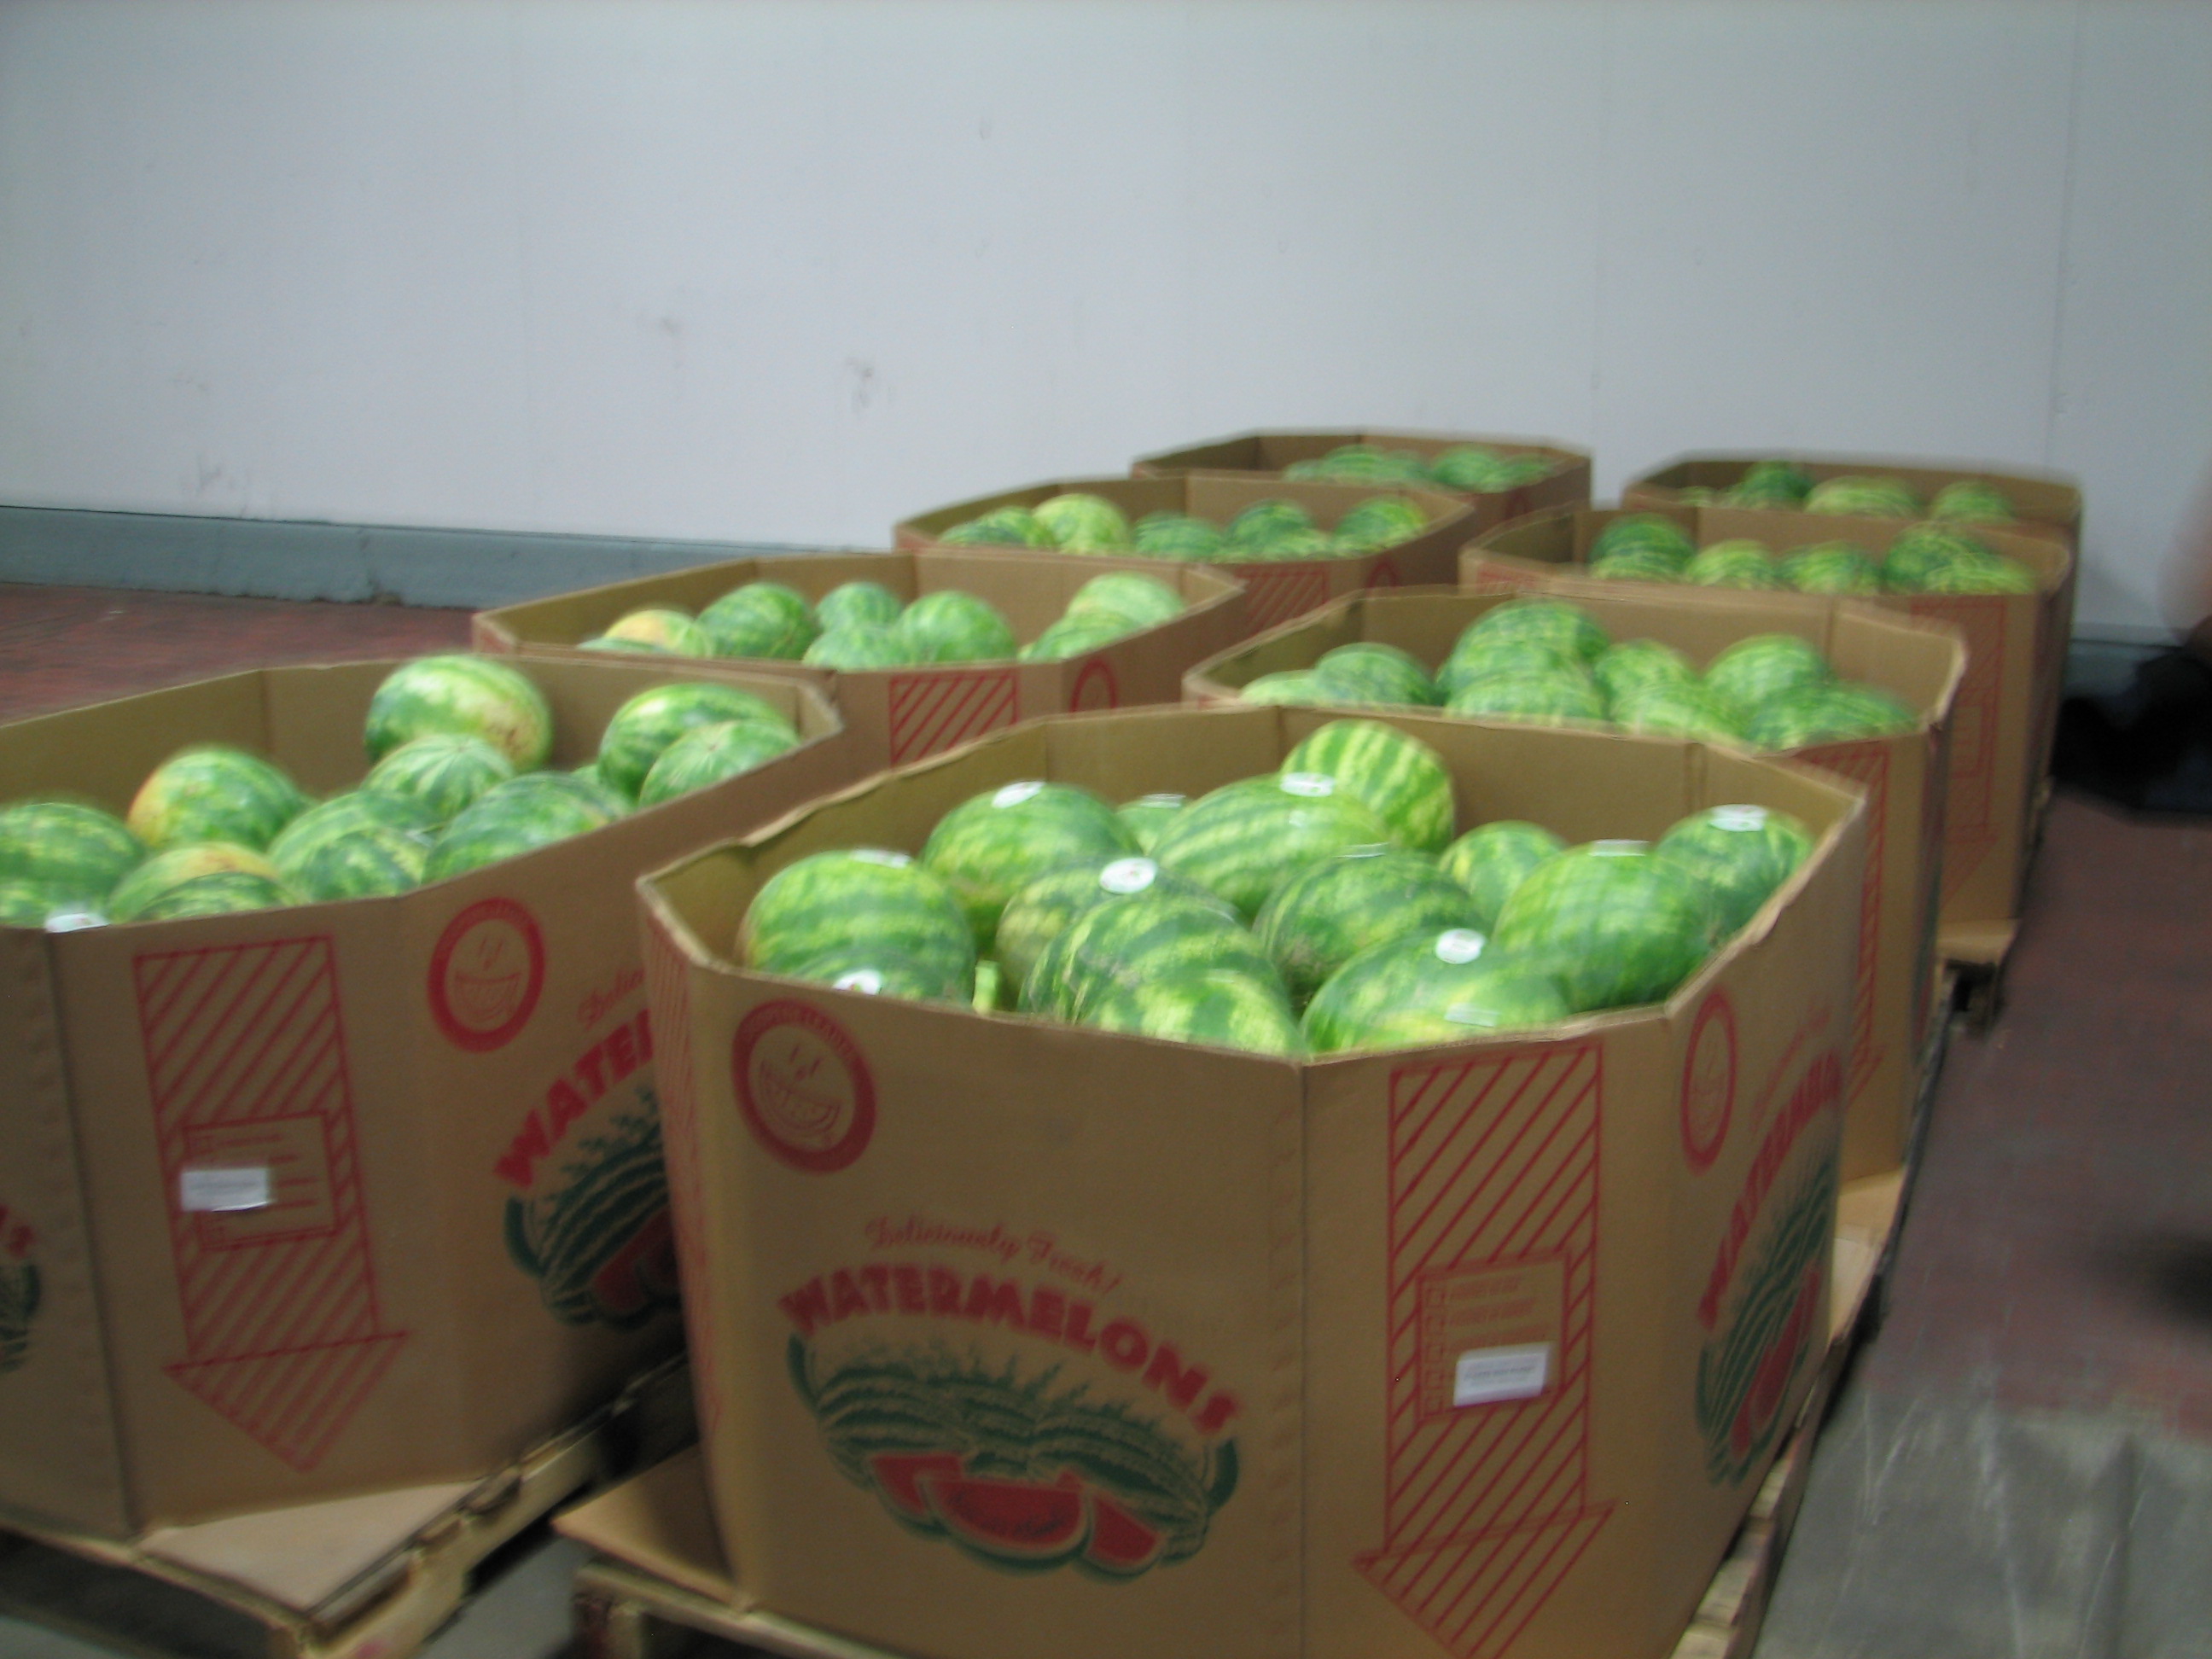 Watermelons at the Procacci warehouse